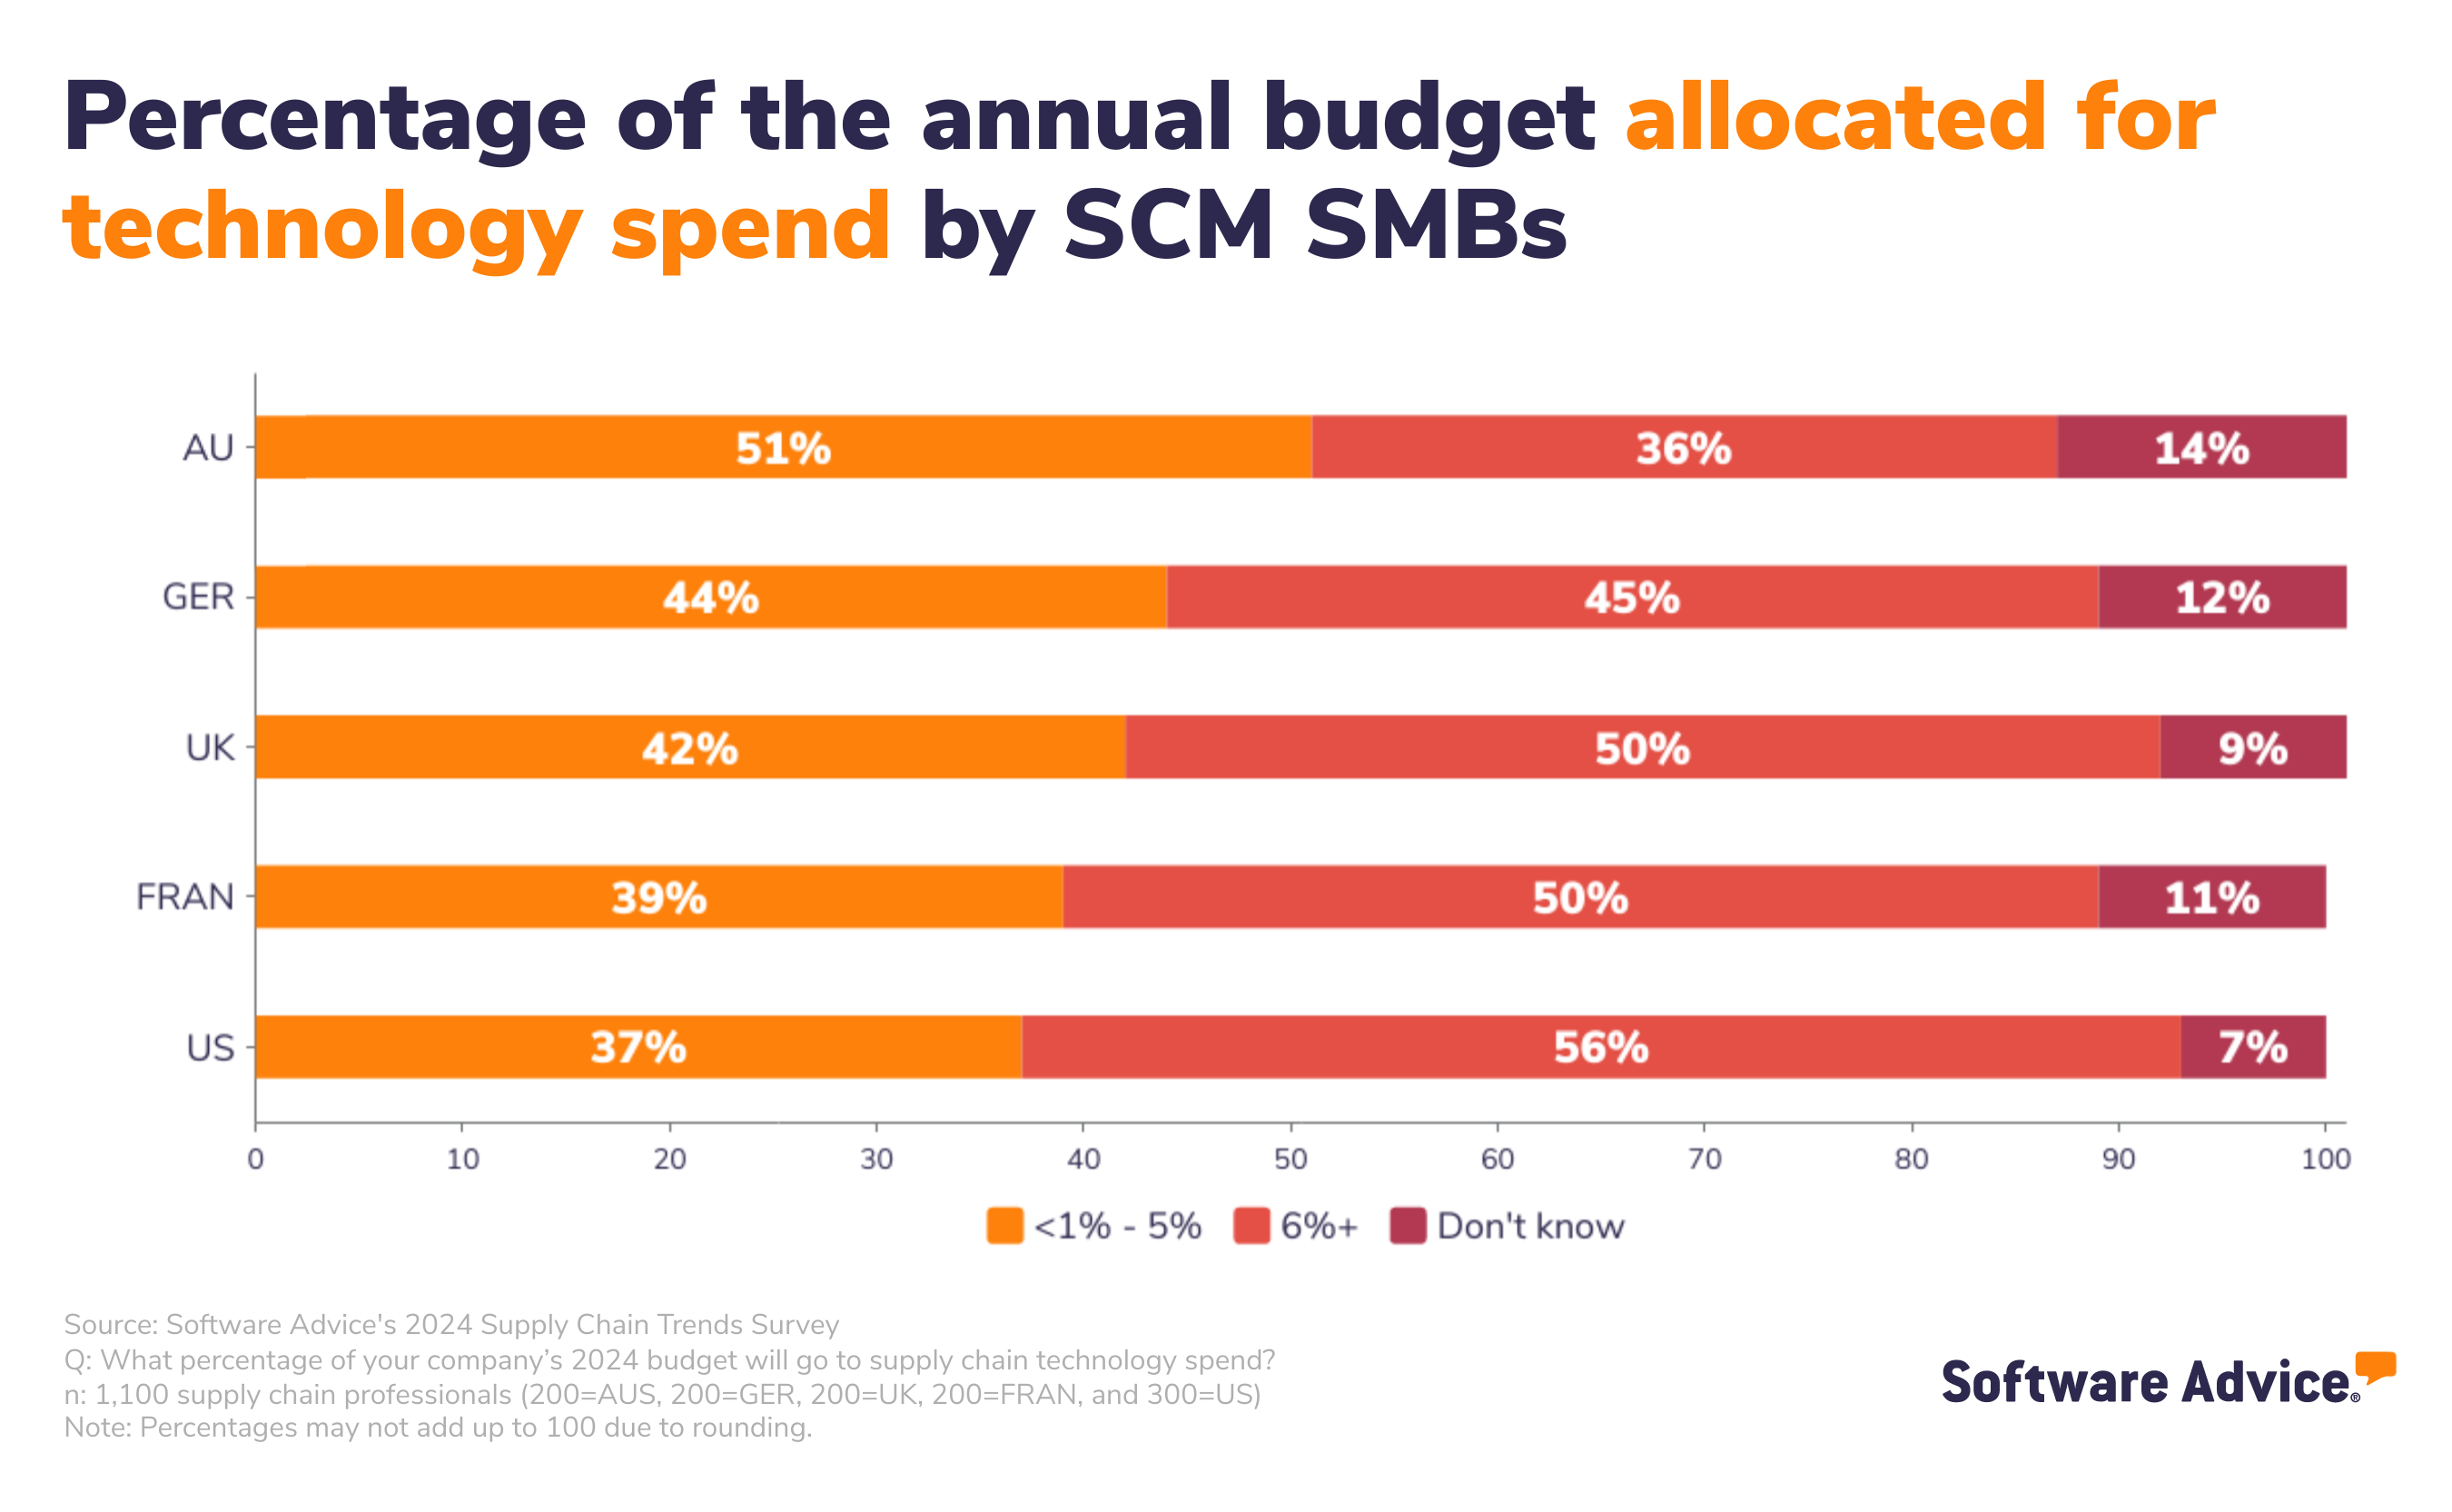 Percentage of business's annual budget allocated for technology spend by SCM SMBs